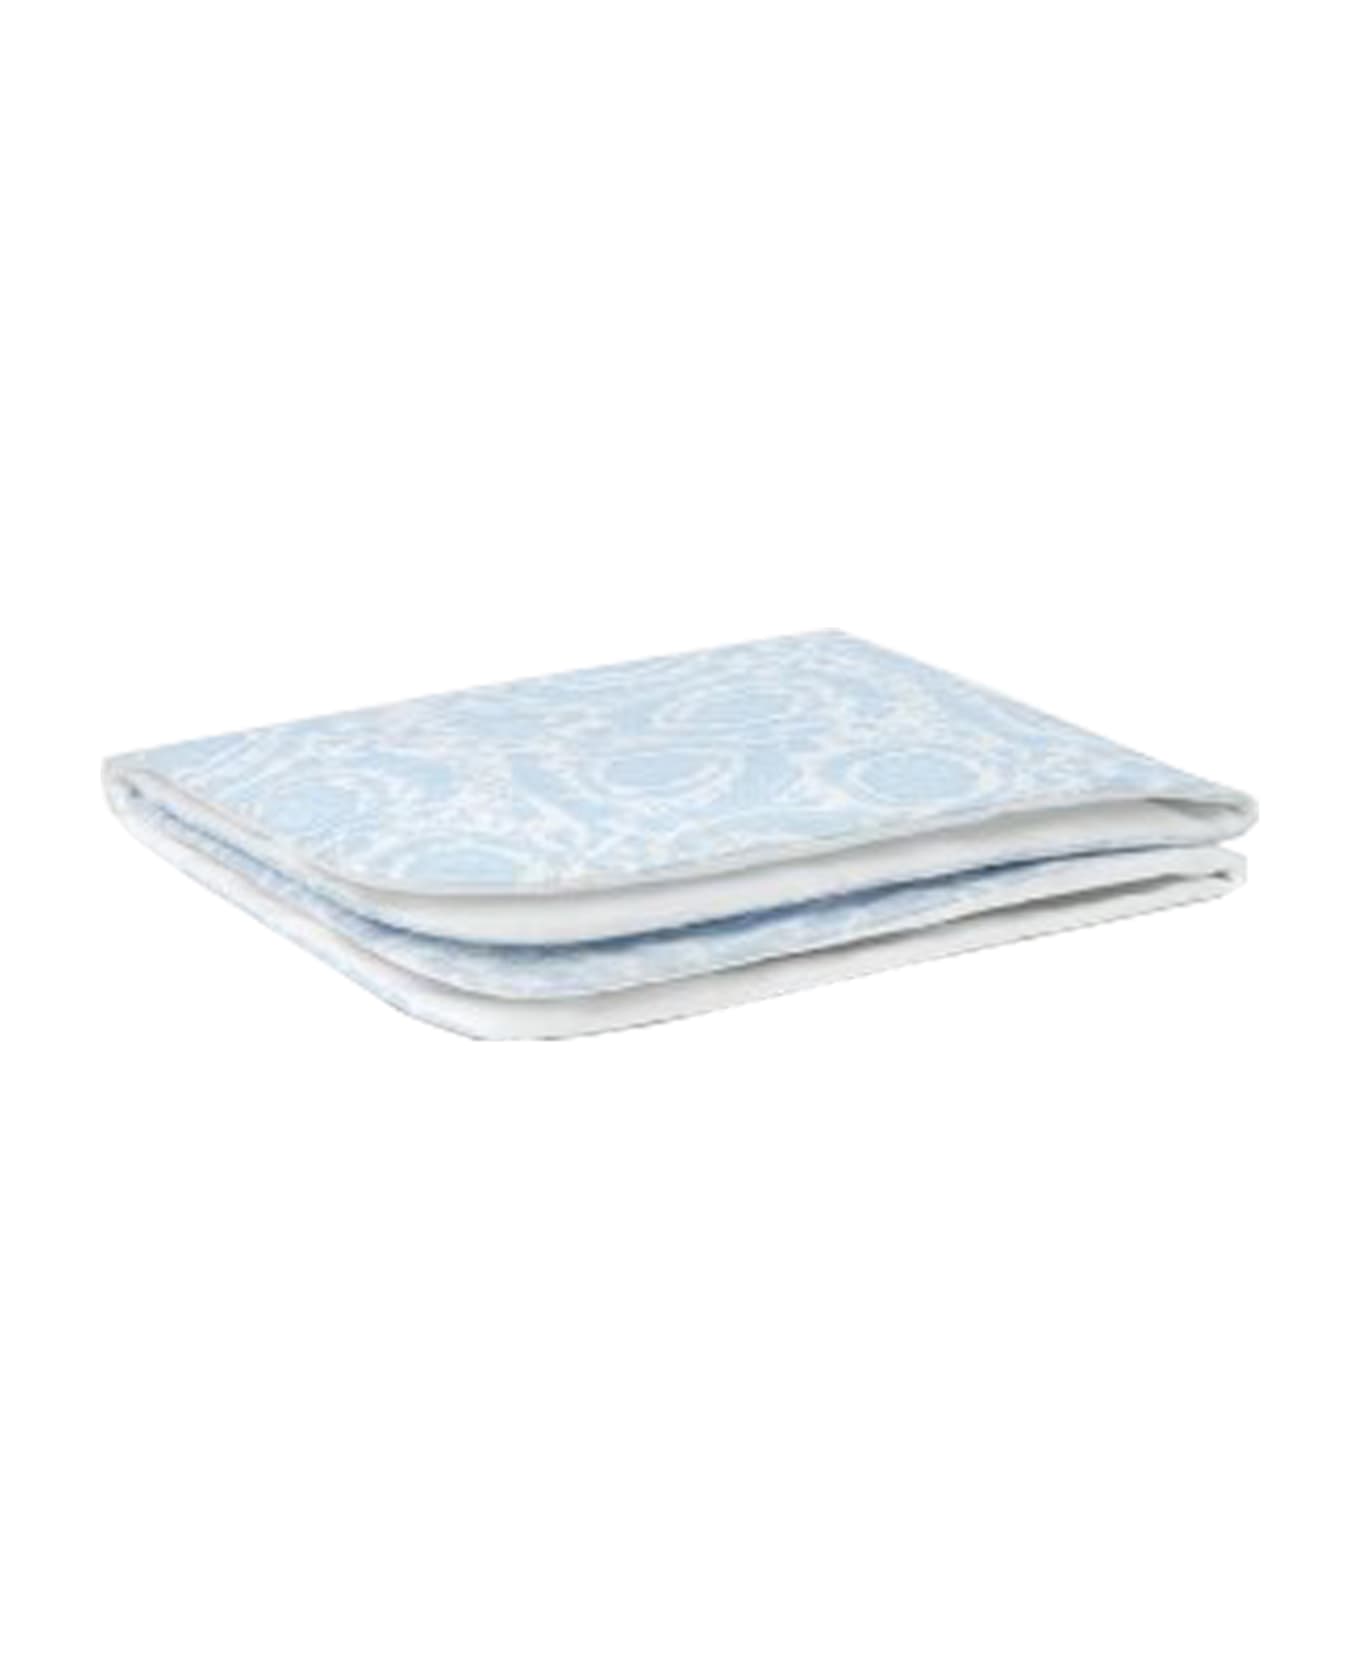 Versace Barocco Padded Baby Blanket - Light blue アクセサリー＆ギフト